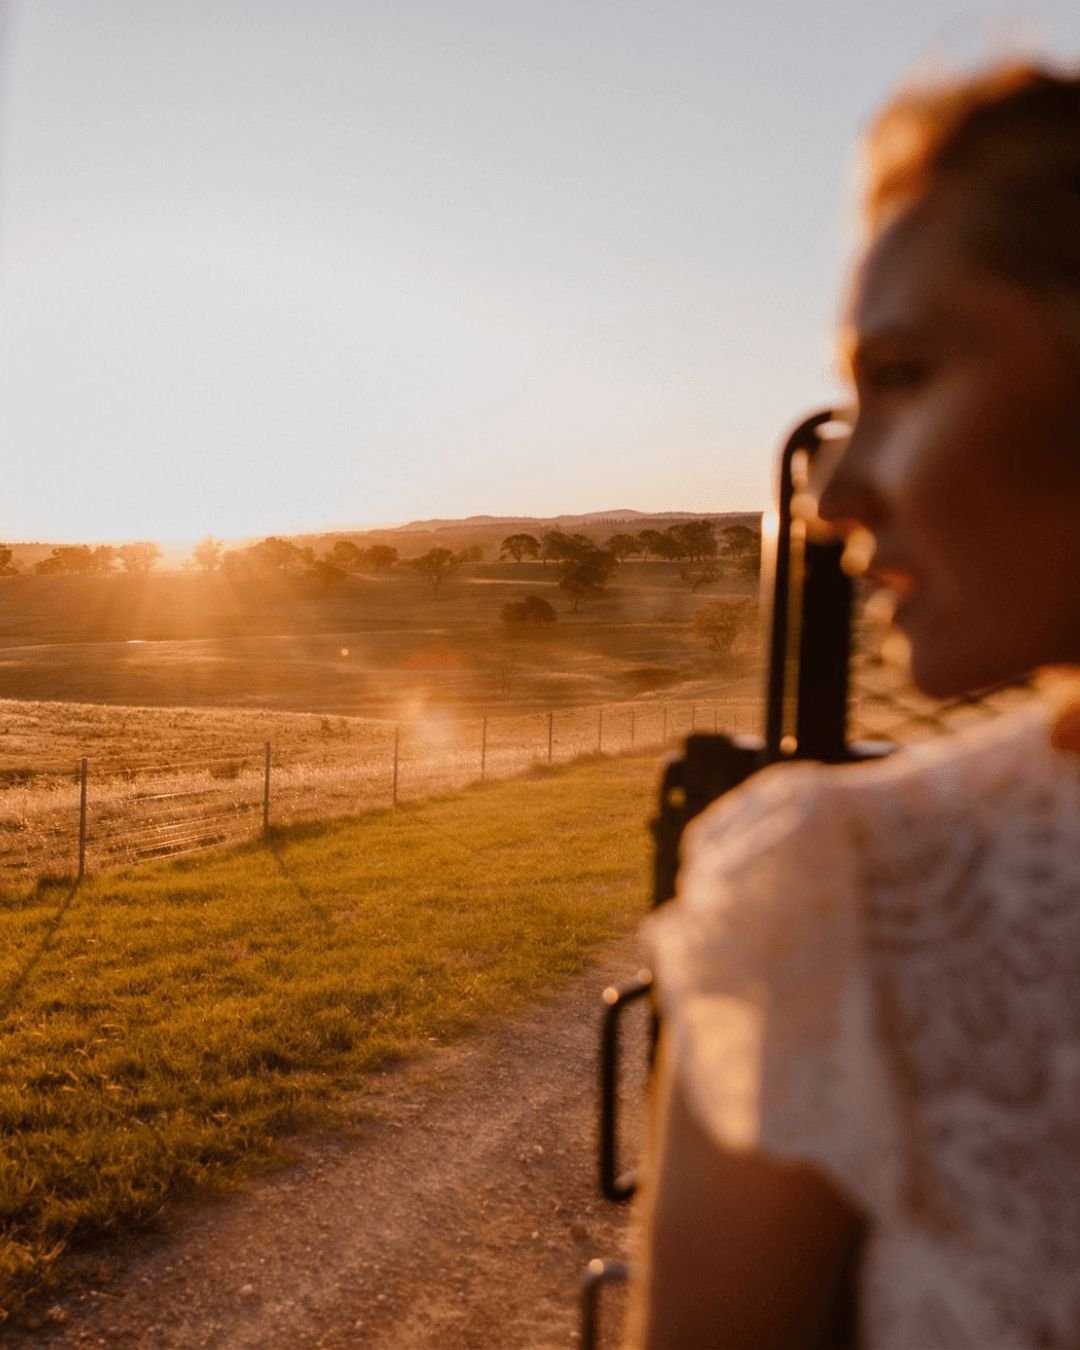 Caught in a sunbeam reverie where the golden light kisses the land 🌄✨. Petrichor Farm isn't just a place; it's a scene stolen from your favourite film. Wanderlust, serenity, and awe live here. #GoldenHour #ScenicViews #Farmlife&quot;